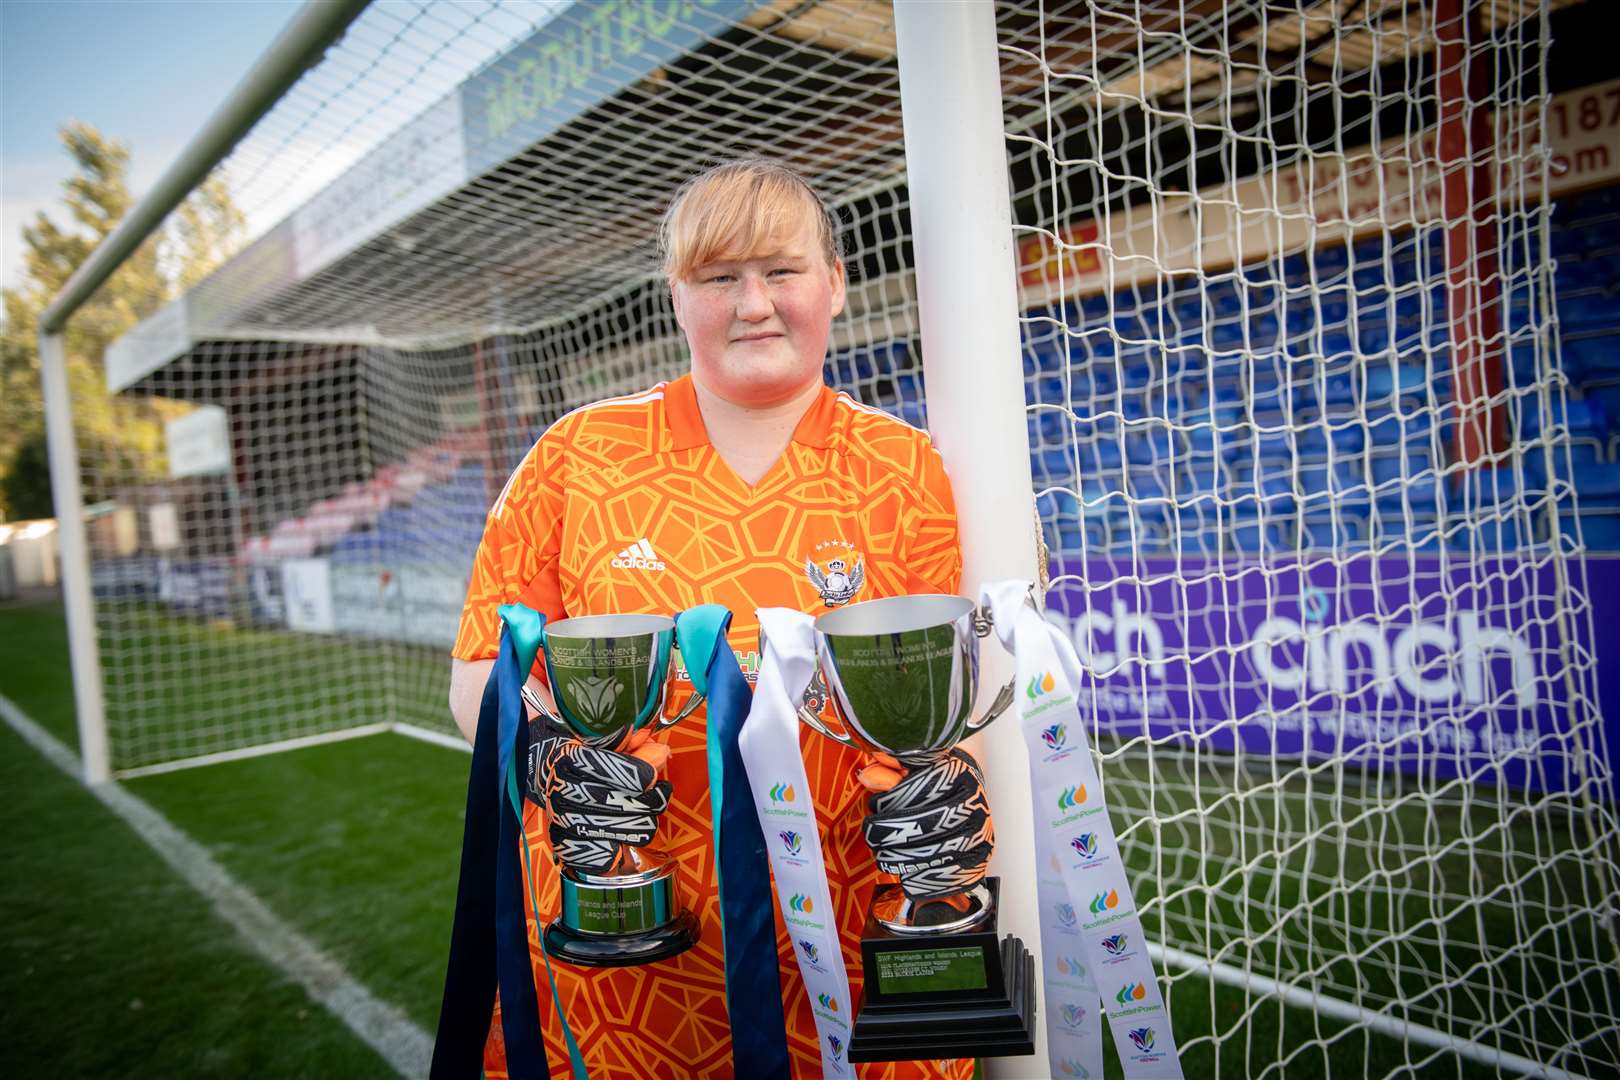 Buckie Ladies goalkeeper Sophia Golebiewski with the league and League Cup trophies. Picture: Callum Mackay